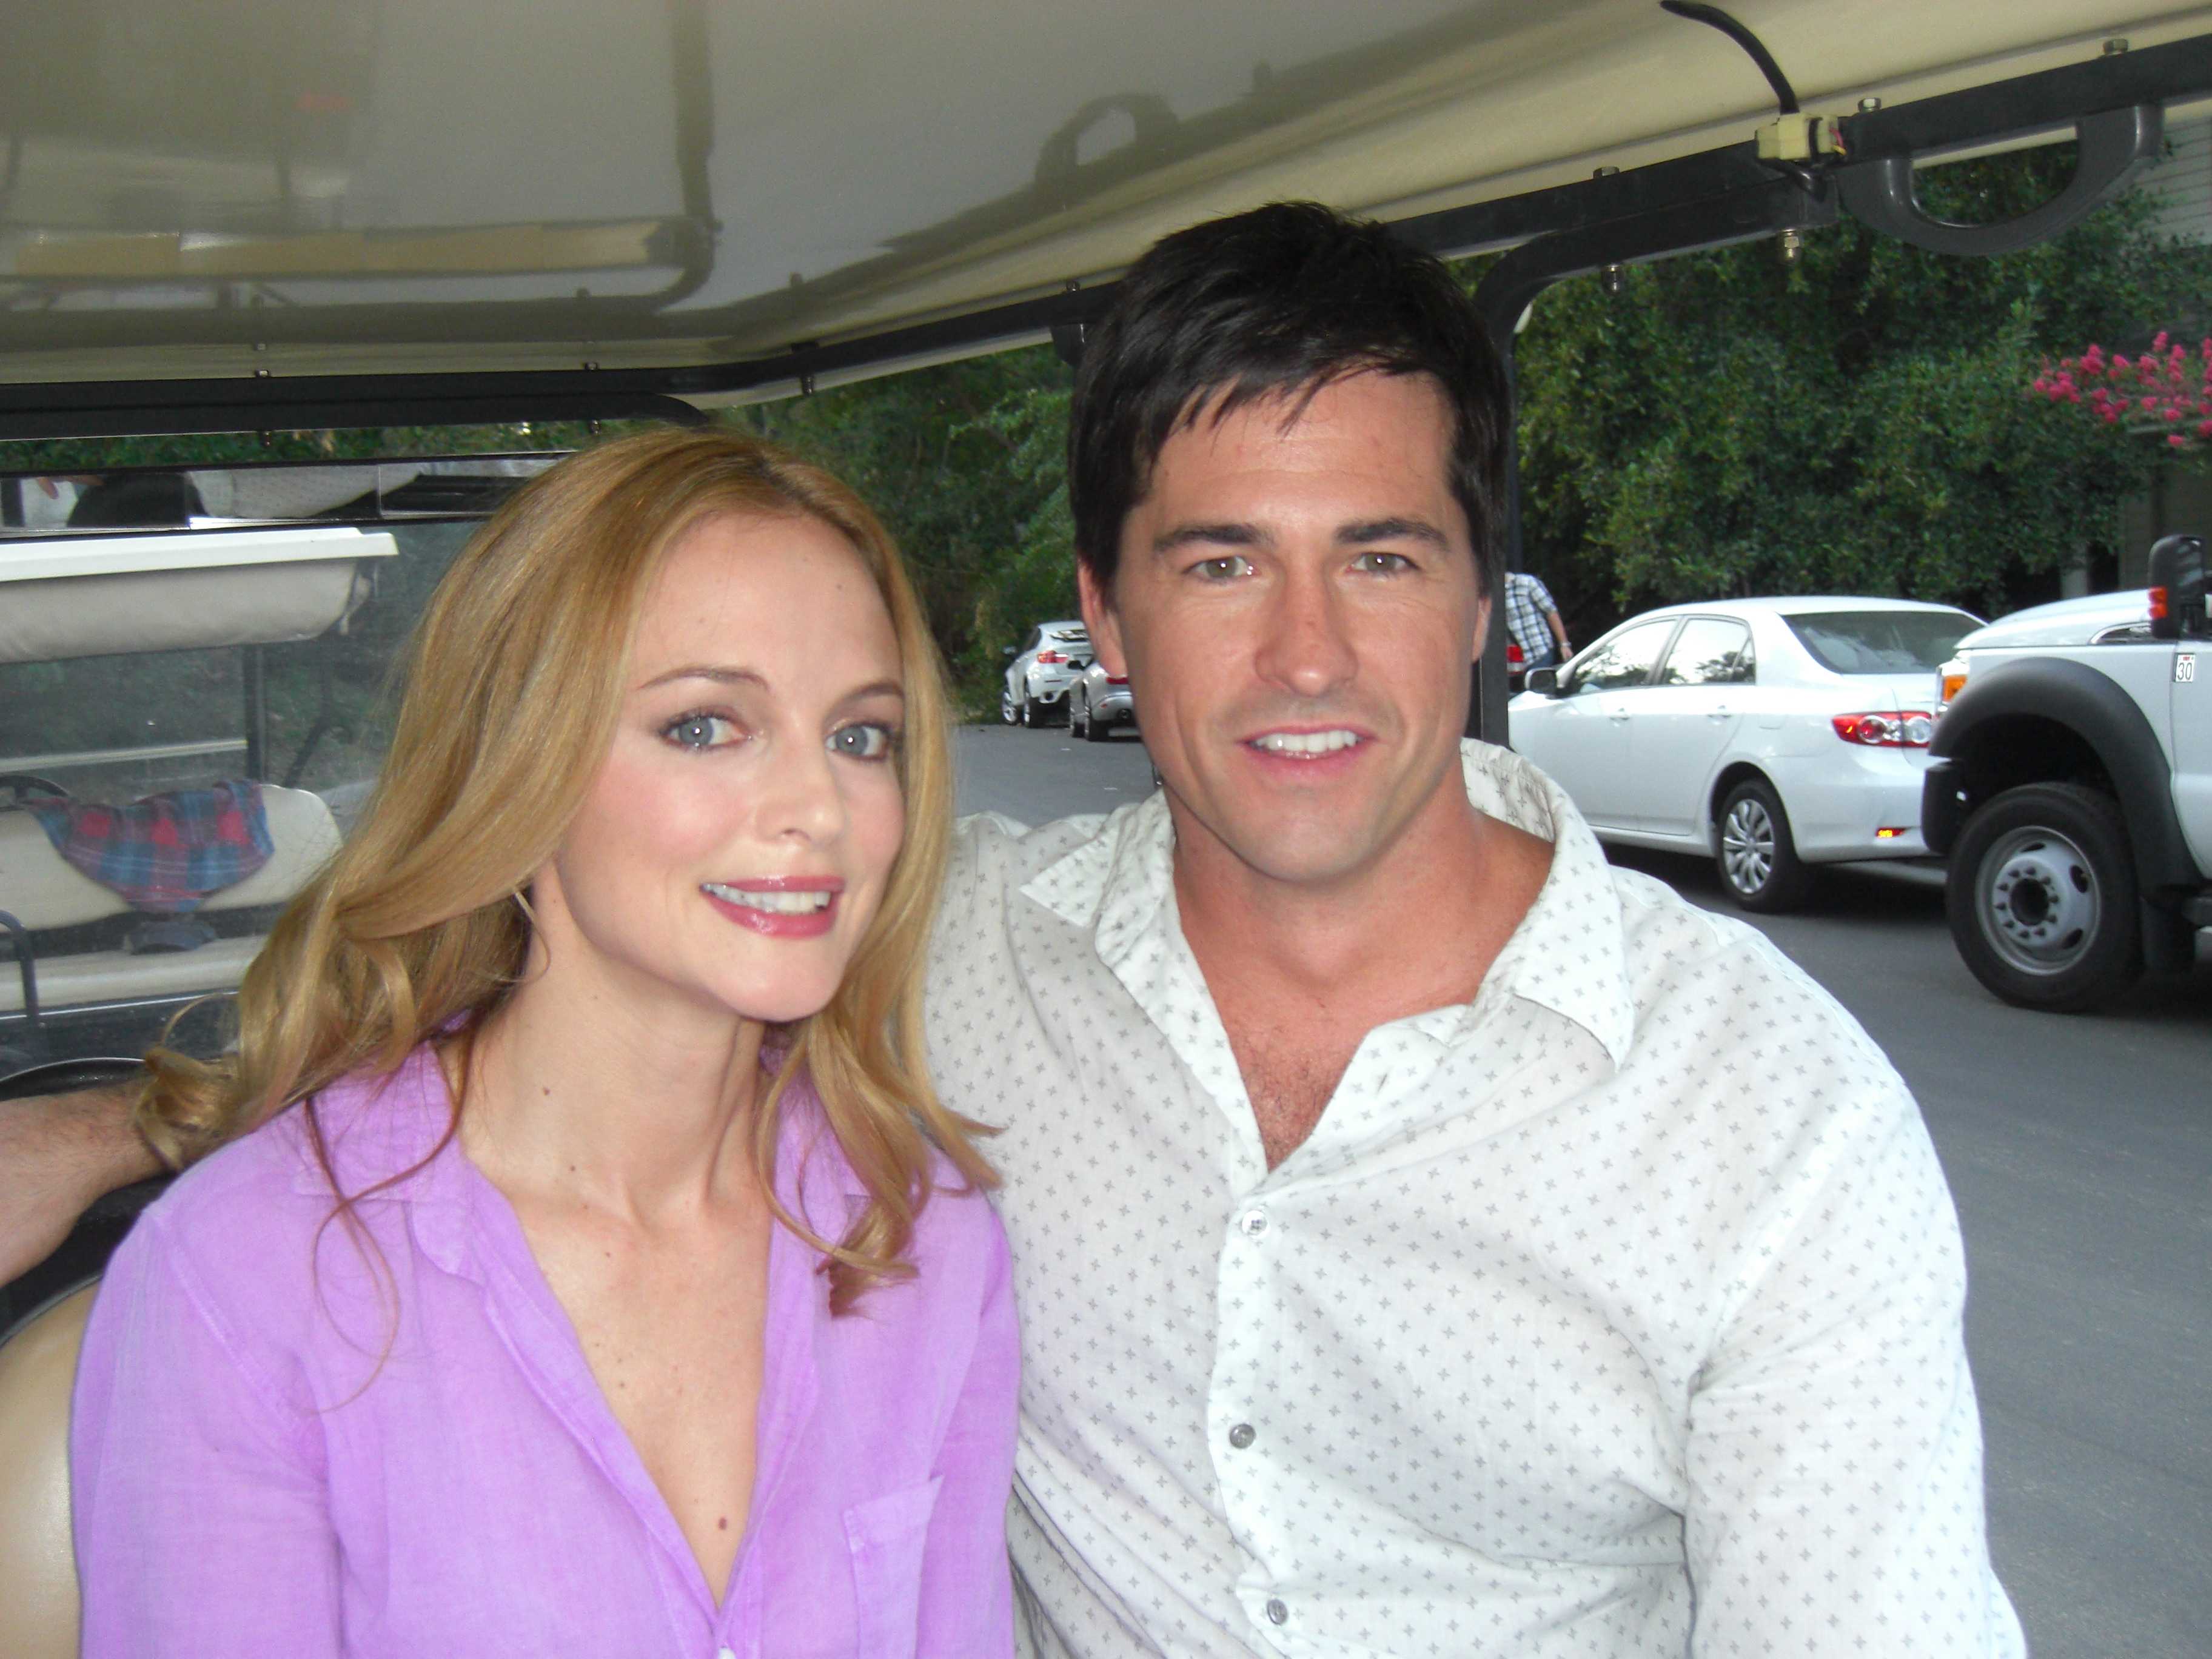 Fun day shooting with Heather Graham on the set of THE HANGOVER 3.